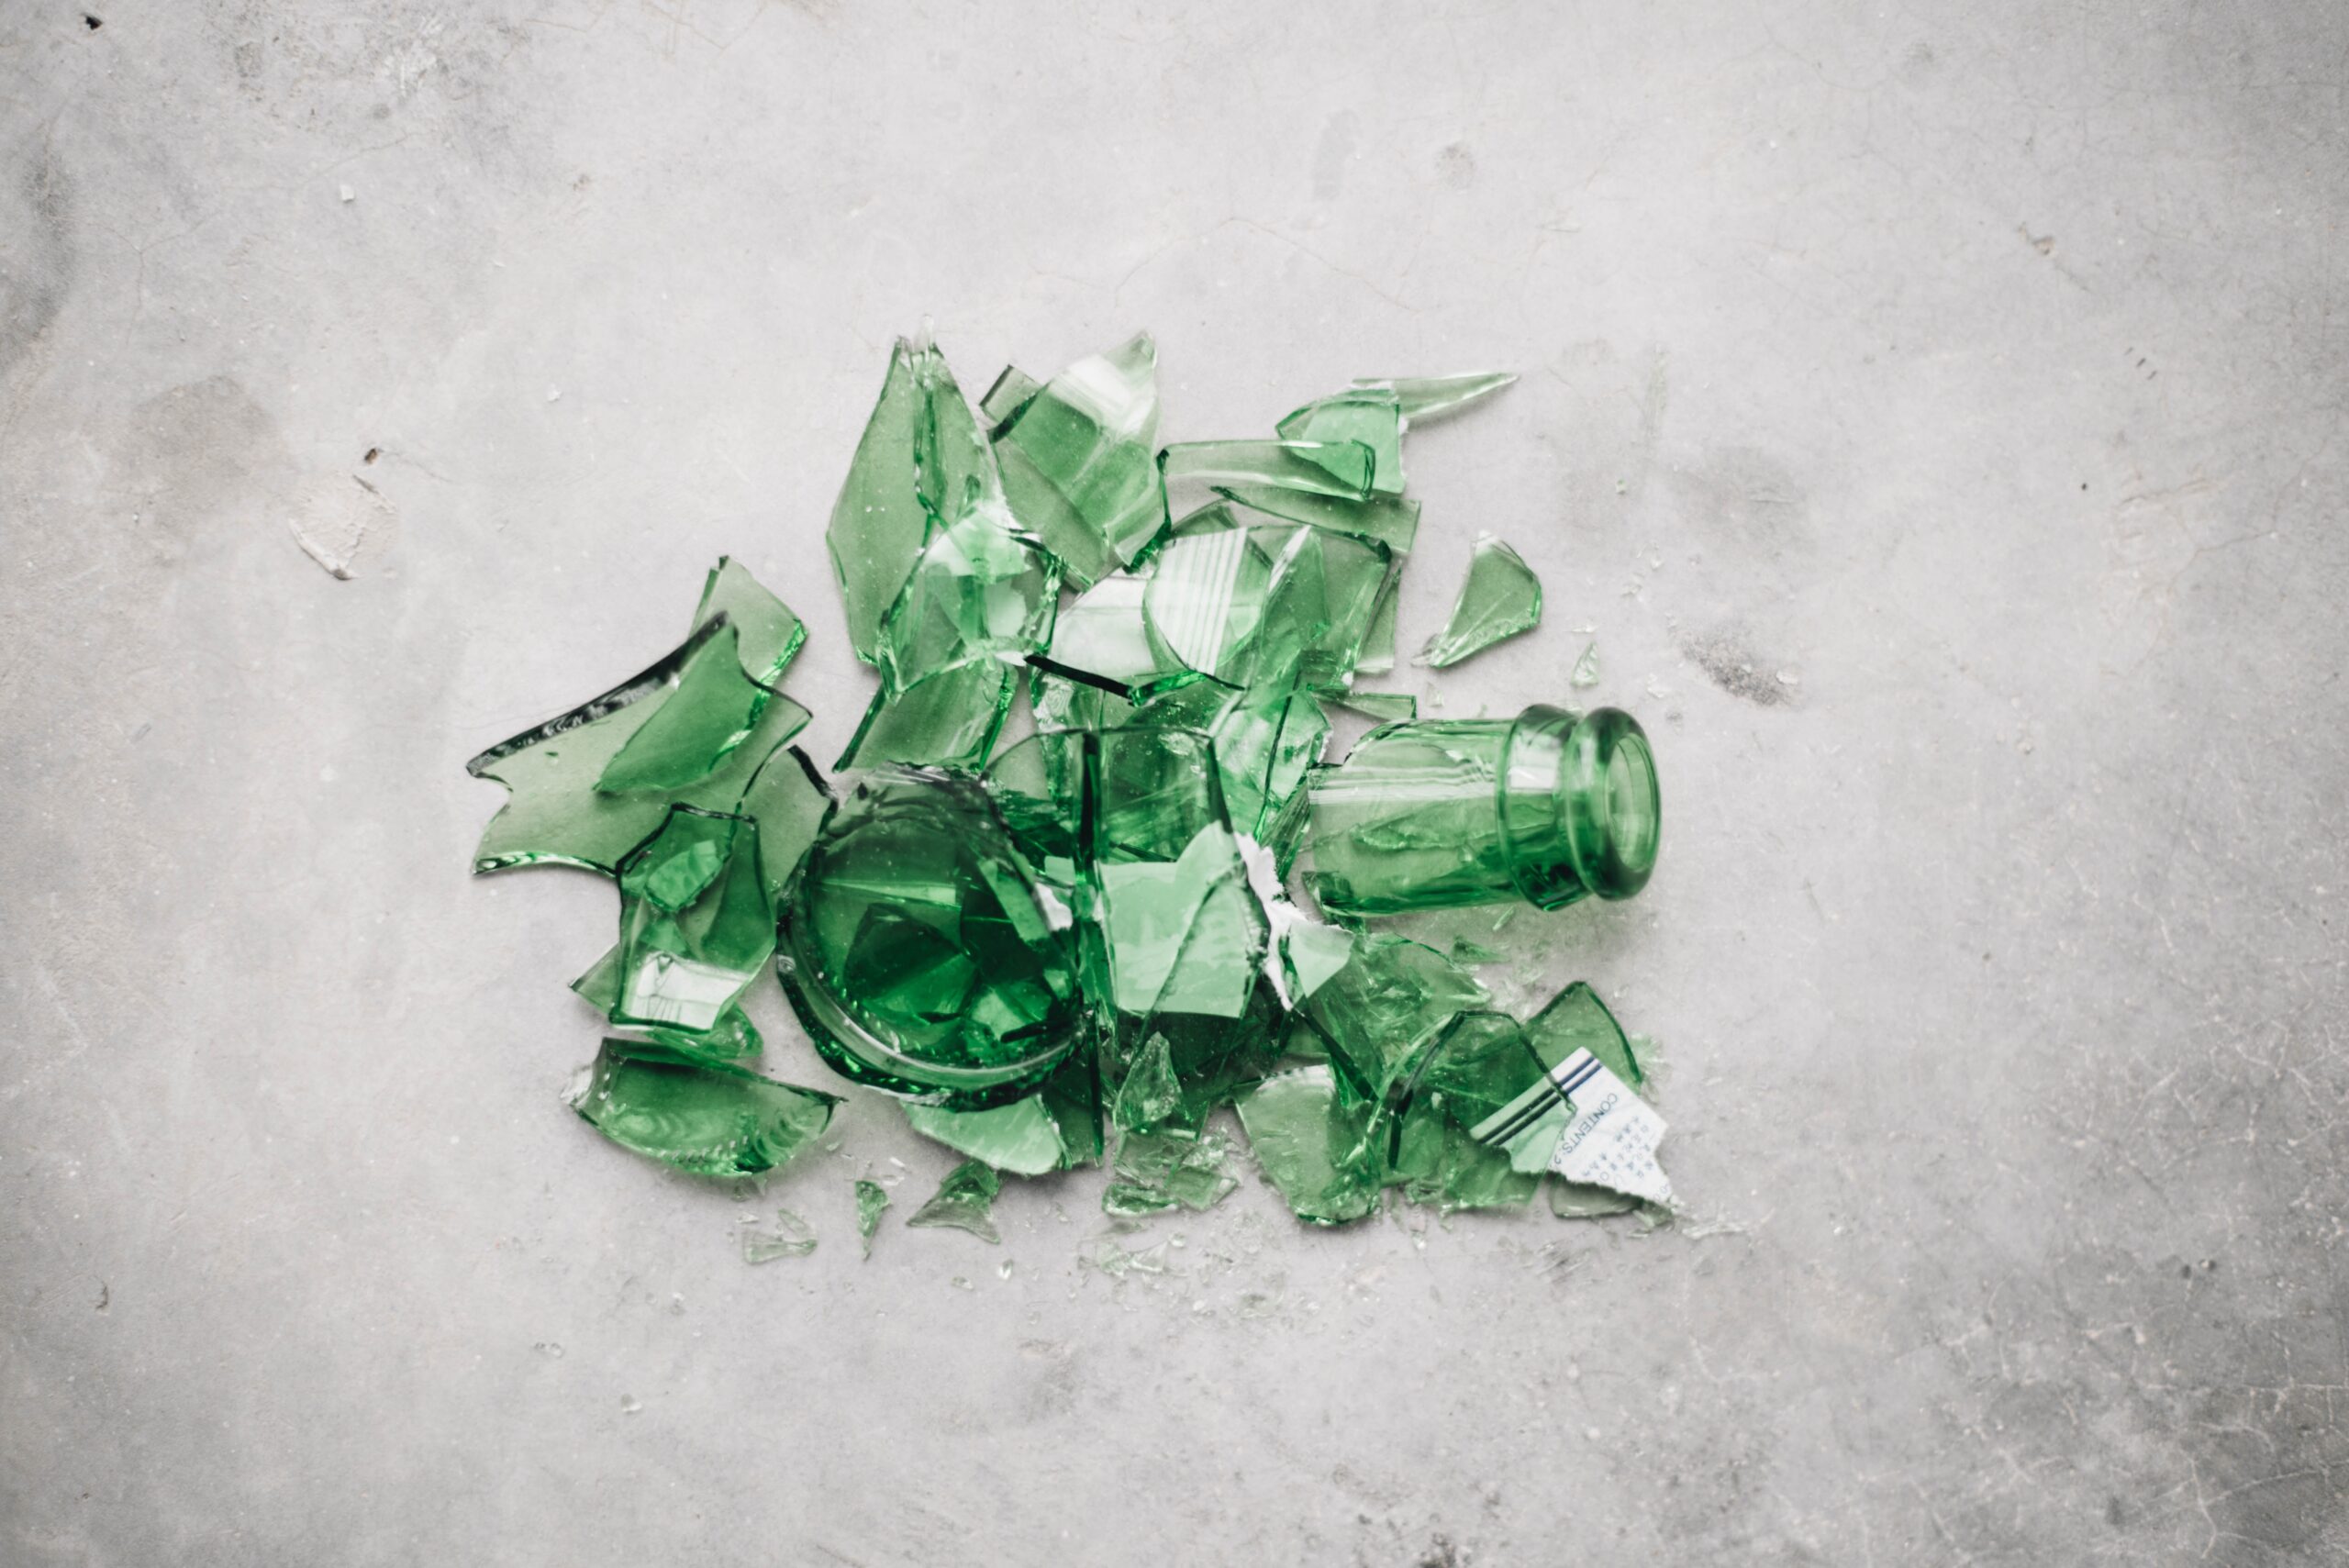 Green Solutions for Getting rid of Broken Glass's featured image